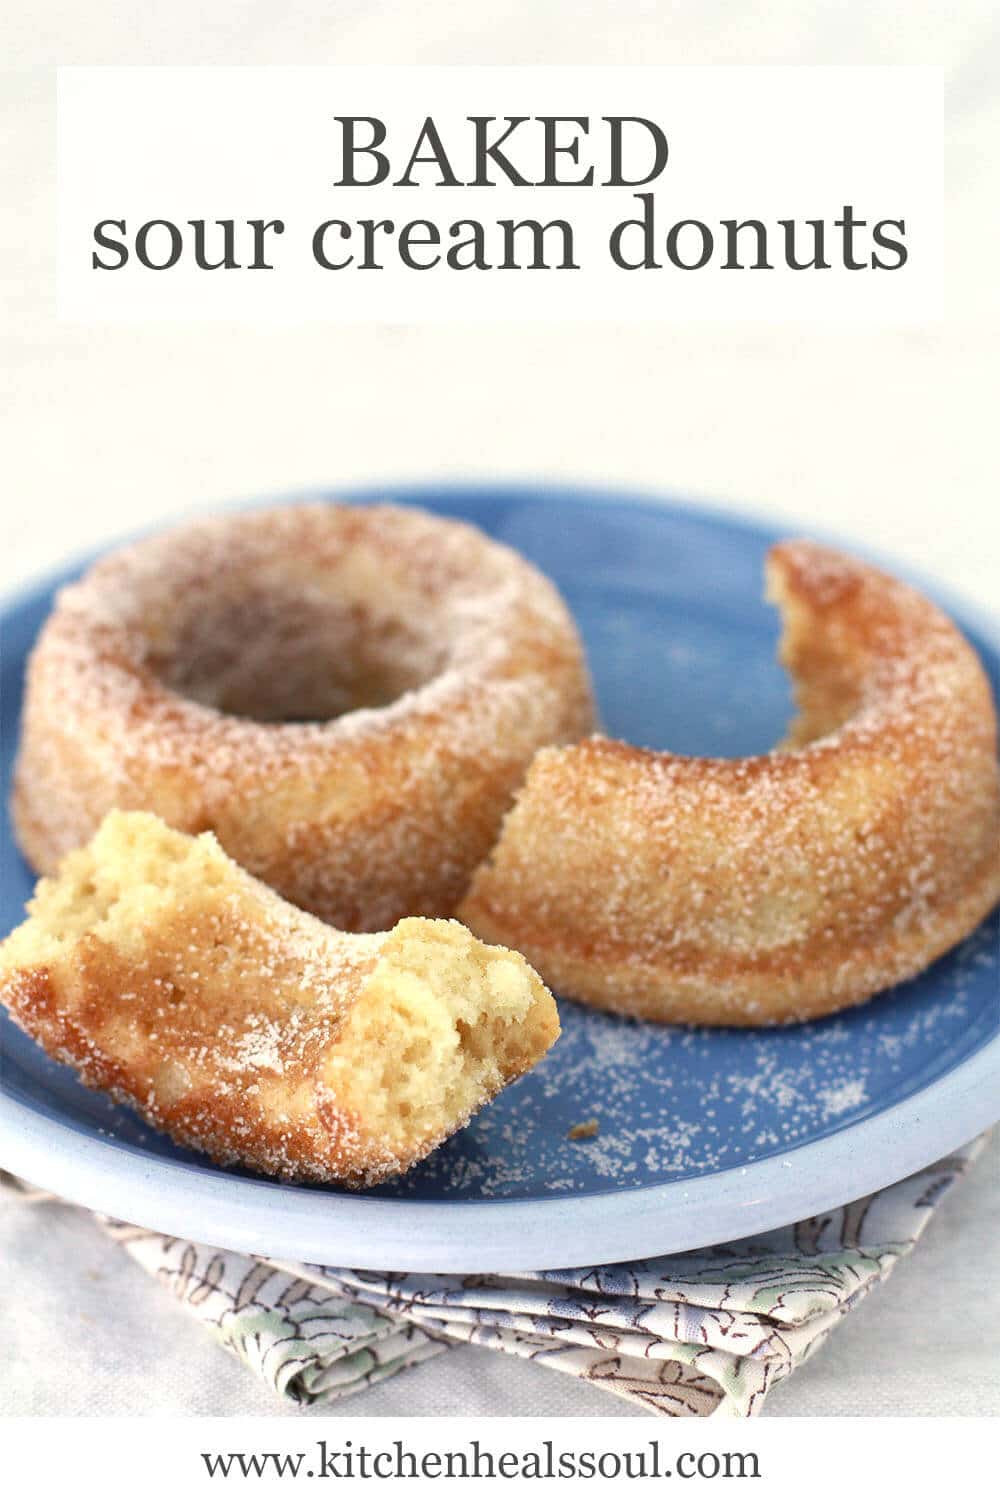 Baked sour cream donuts, one broken in half, coated with granulated sugar on a blue plate with floral napkin underneath